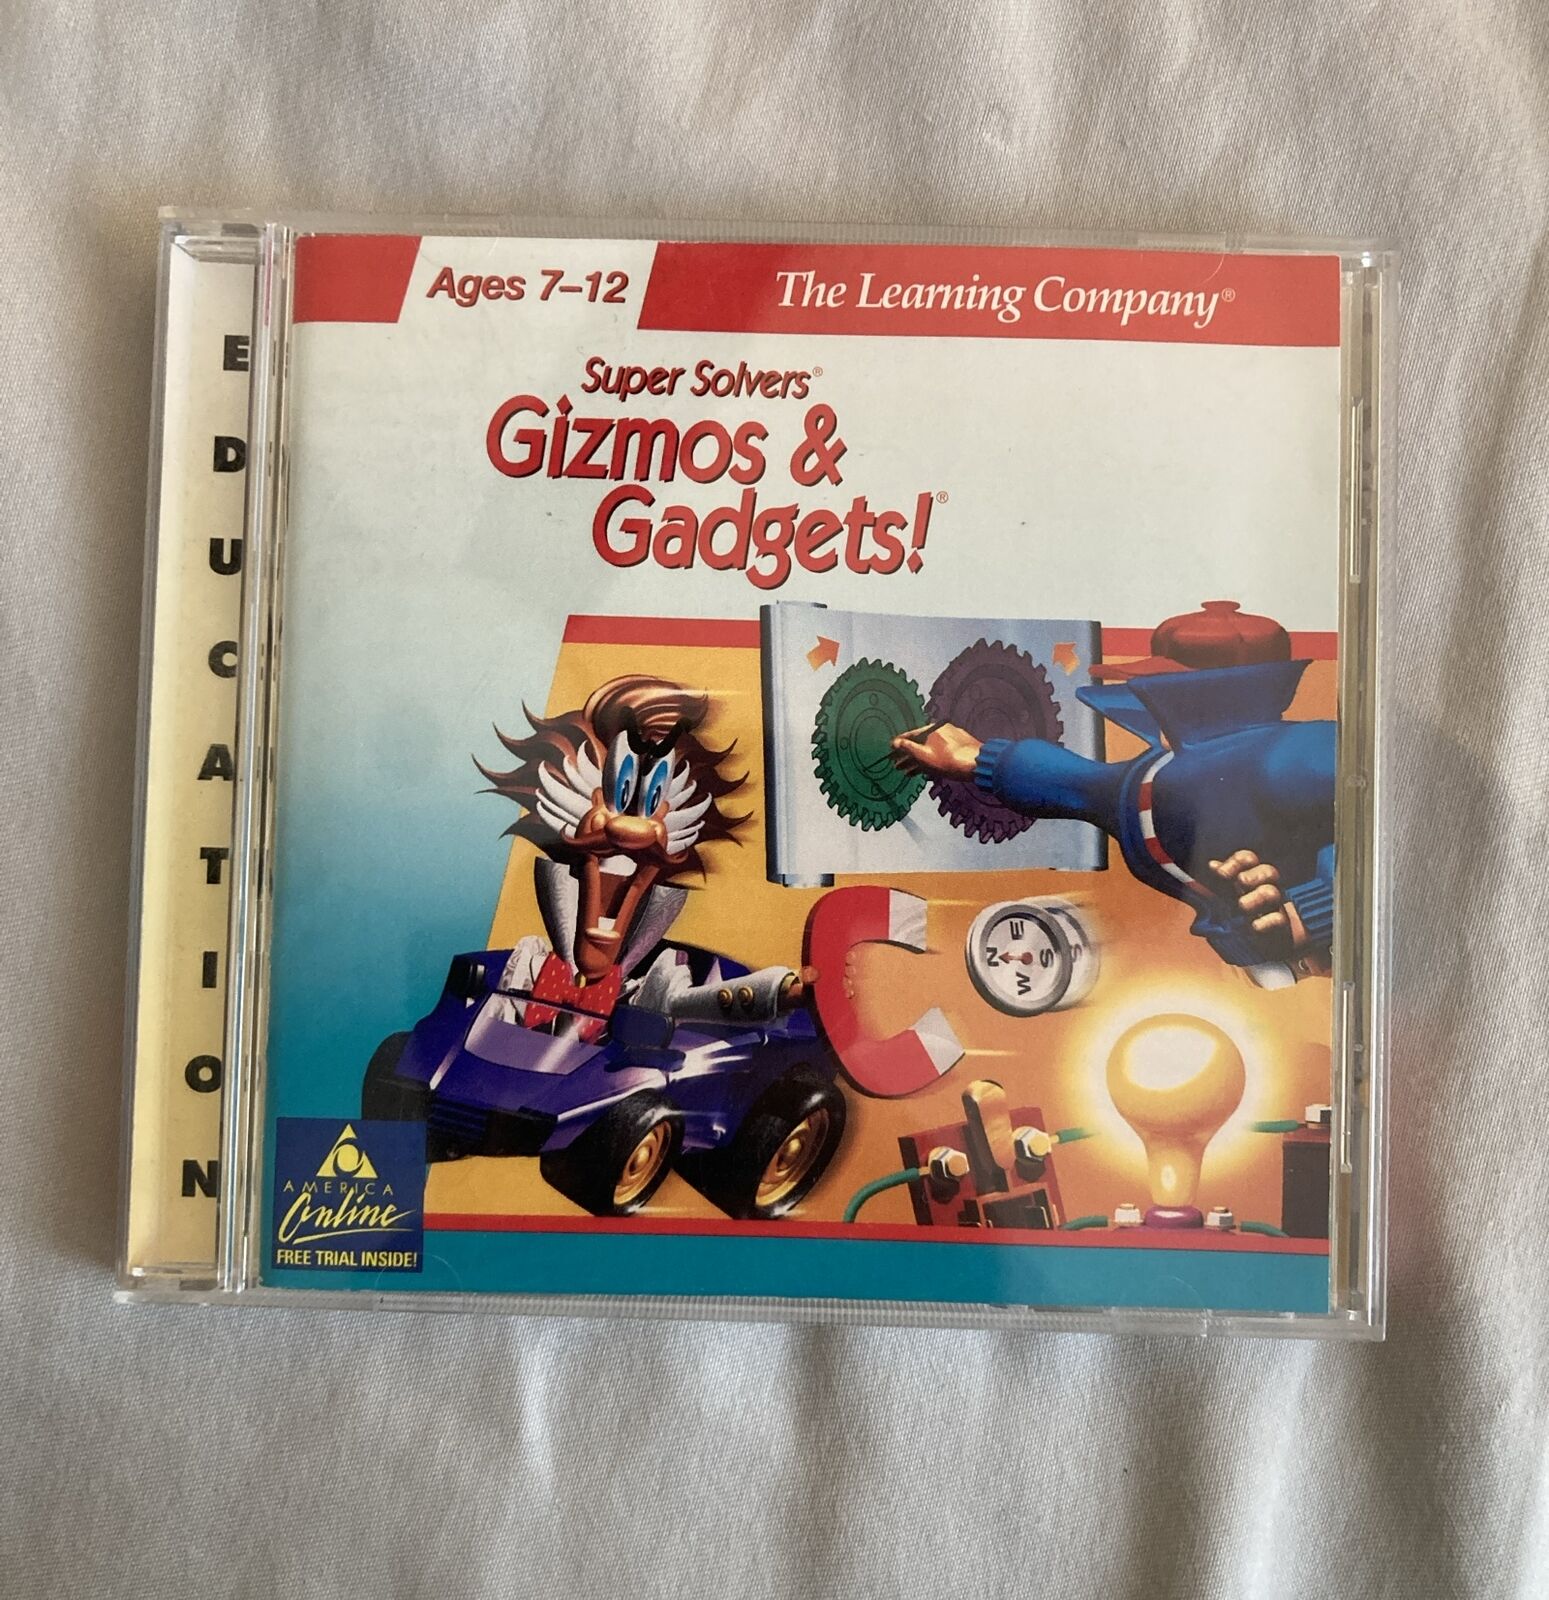 Super Solvers Gizmos and Gadgets The Learning Company PC/Macintosh Computer Game